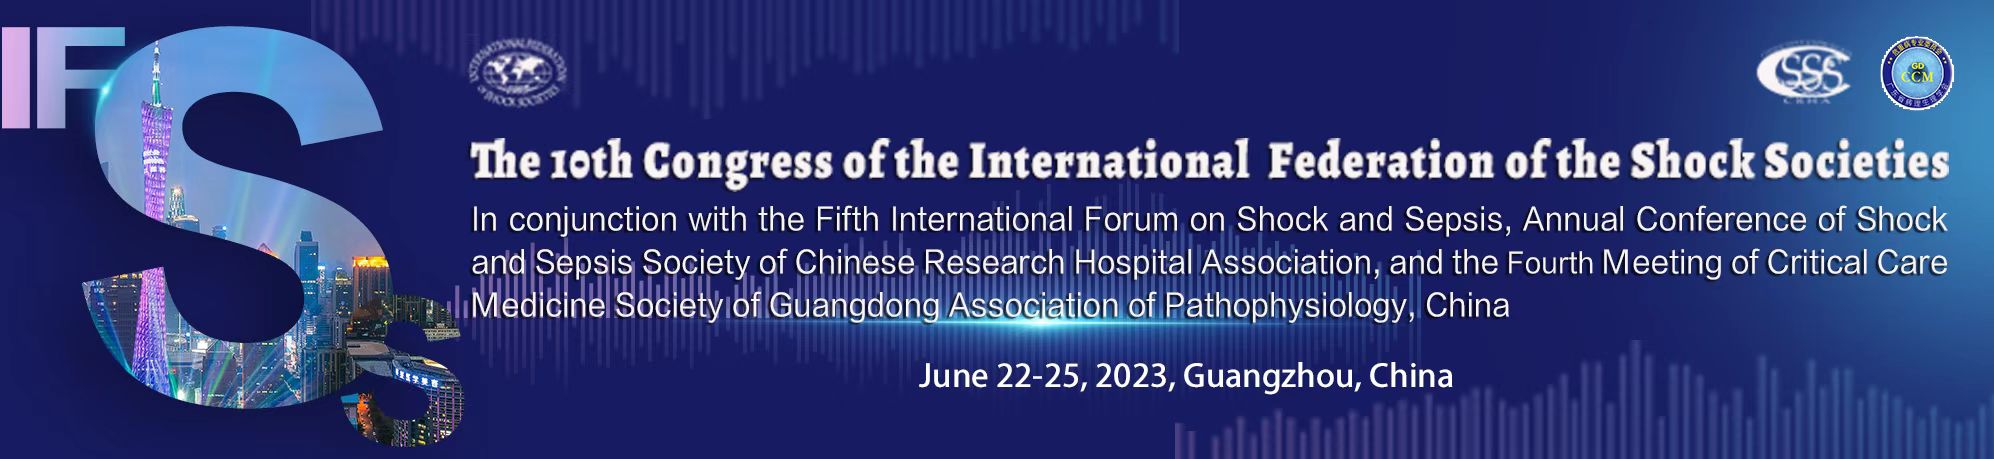 The 10th Congress of the International Federation of the Shock Societies